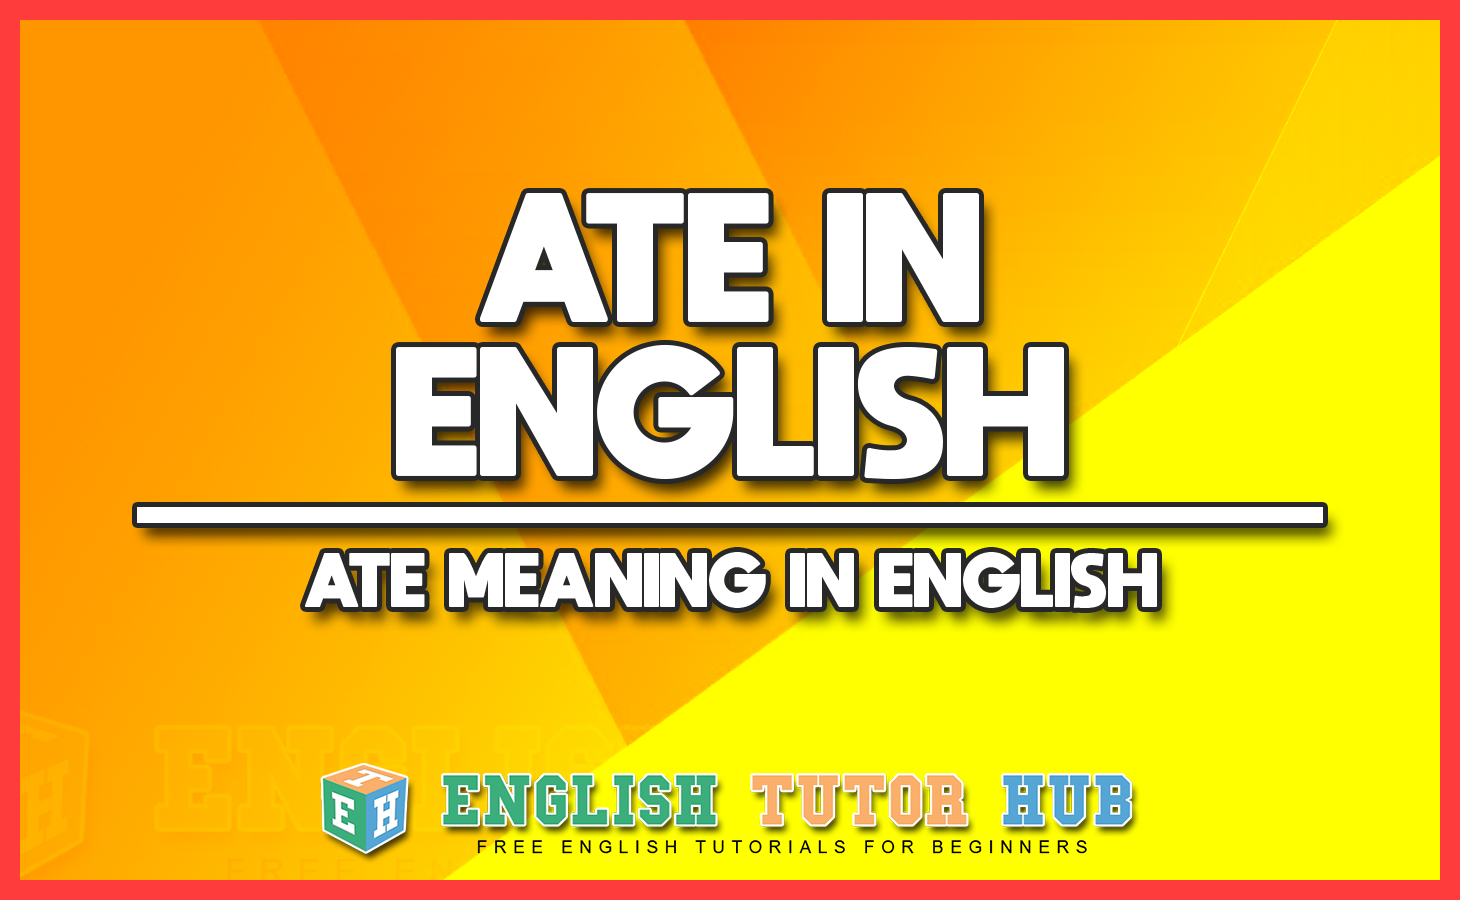 ATE IN ENGLISH - ATE MEANING IN ENGLISH